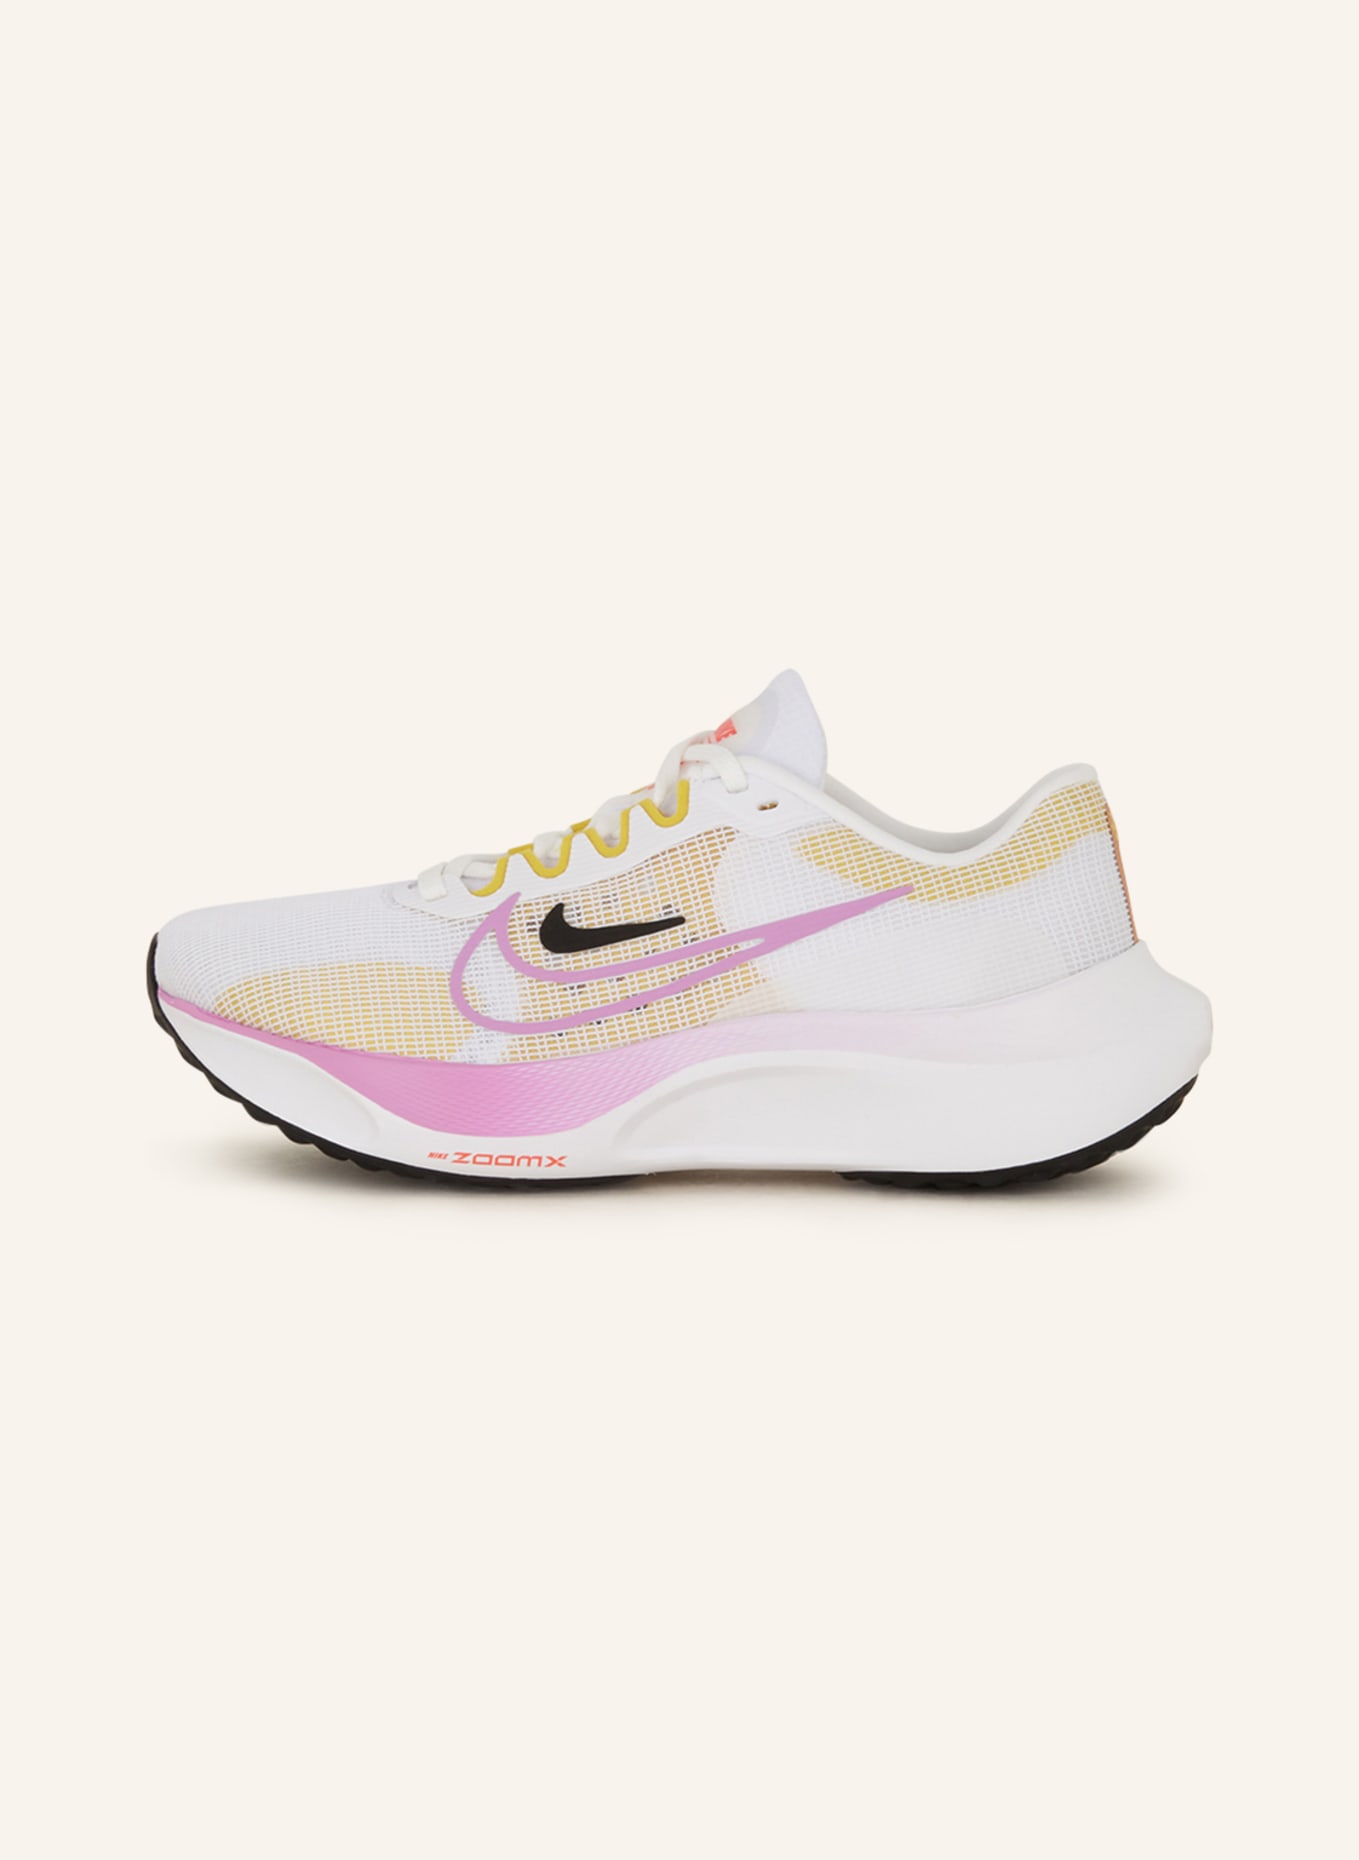 Nike Running shoes ZOOM FLY 5, Color: WHITE/ FUCHSIA/ DARK YELLOW (Image 4)